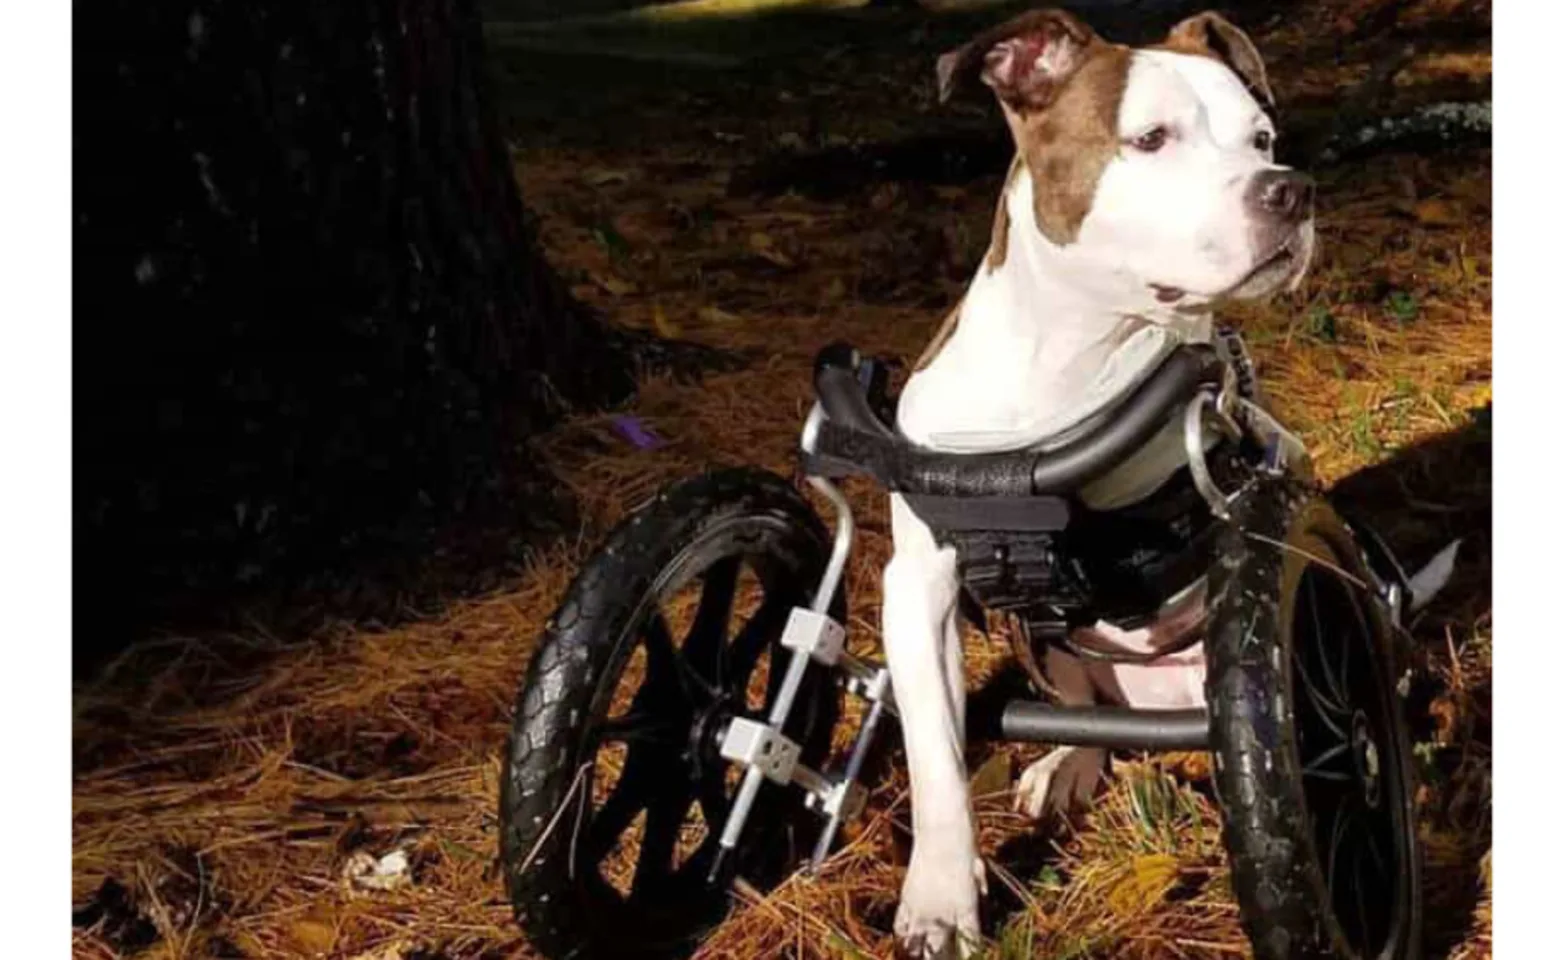 Harley, a small brown and white dog, in a doggy wheelchair